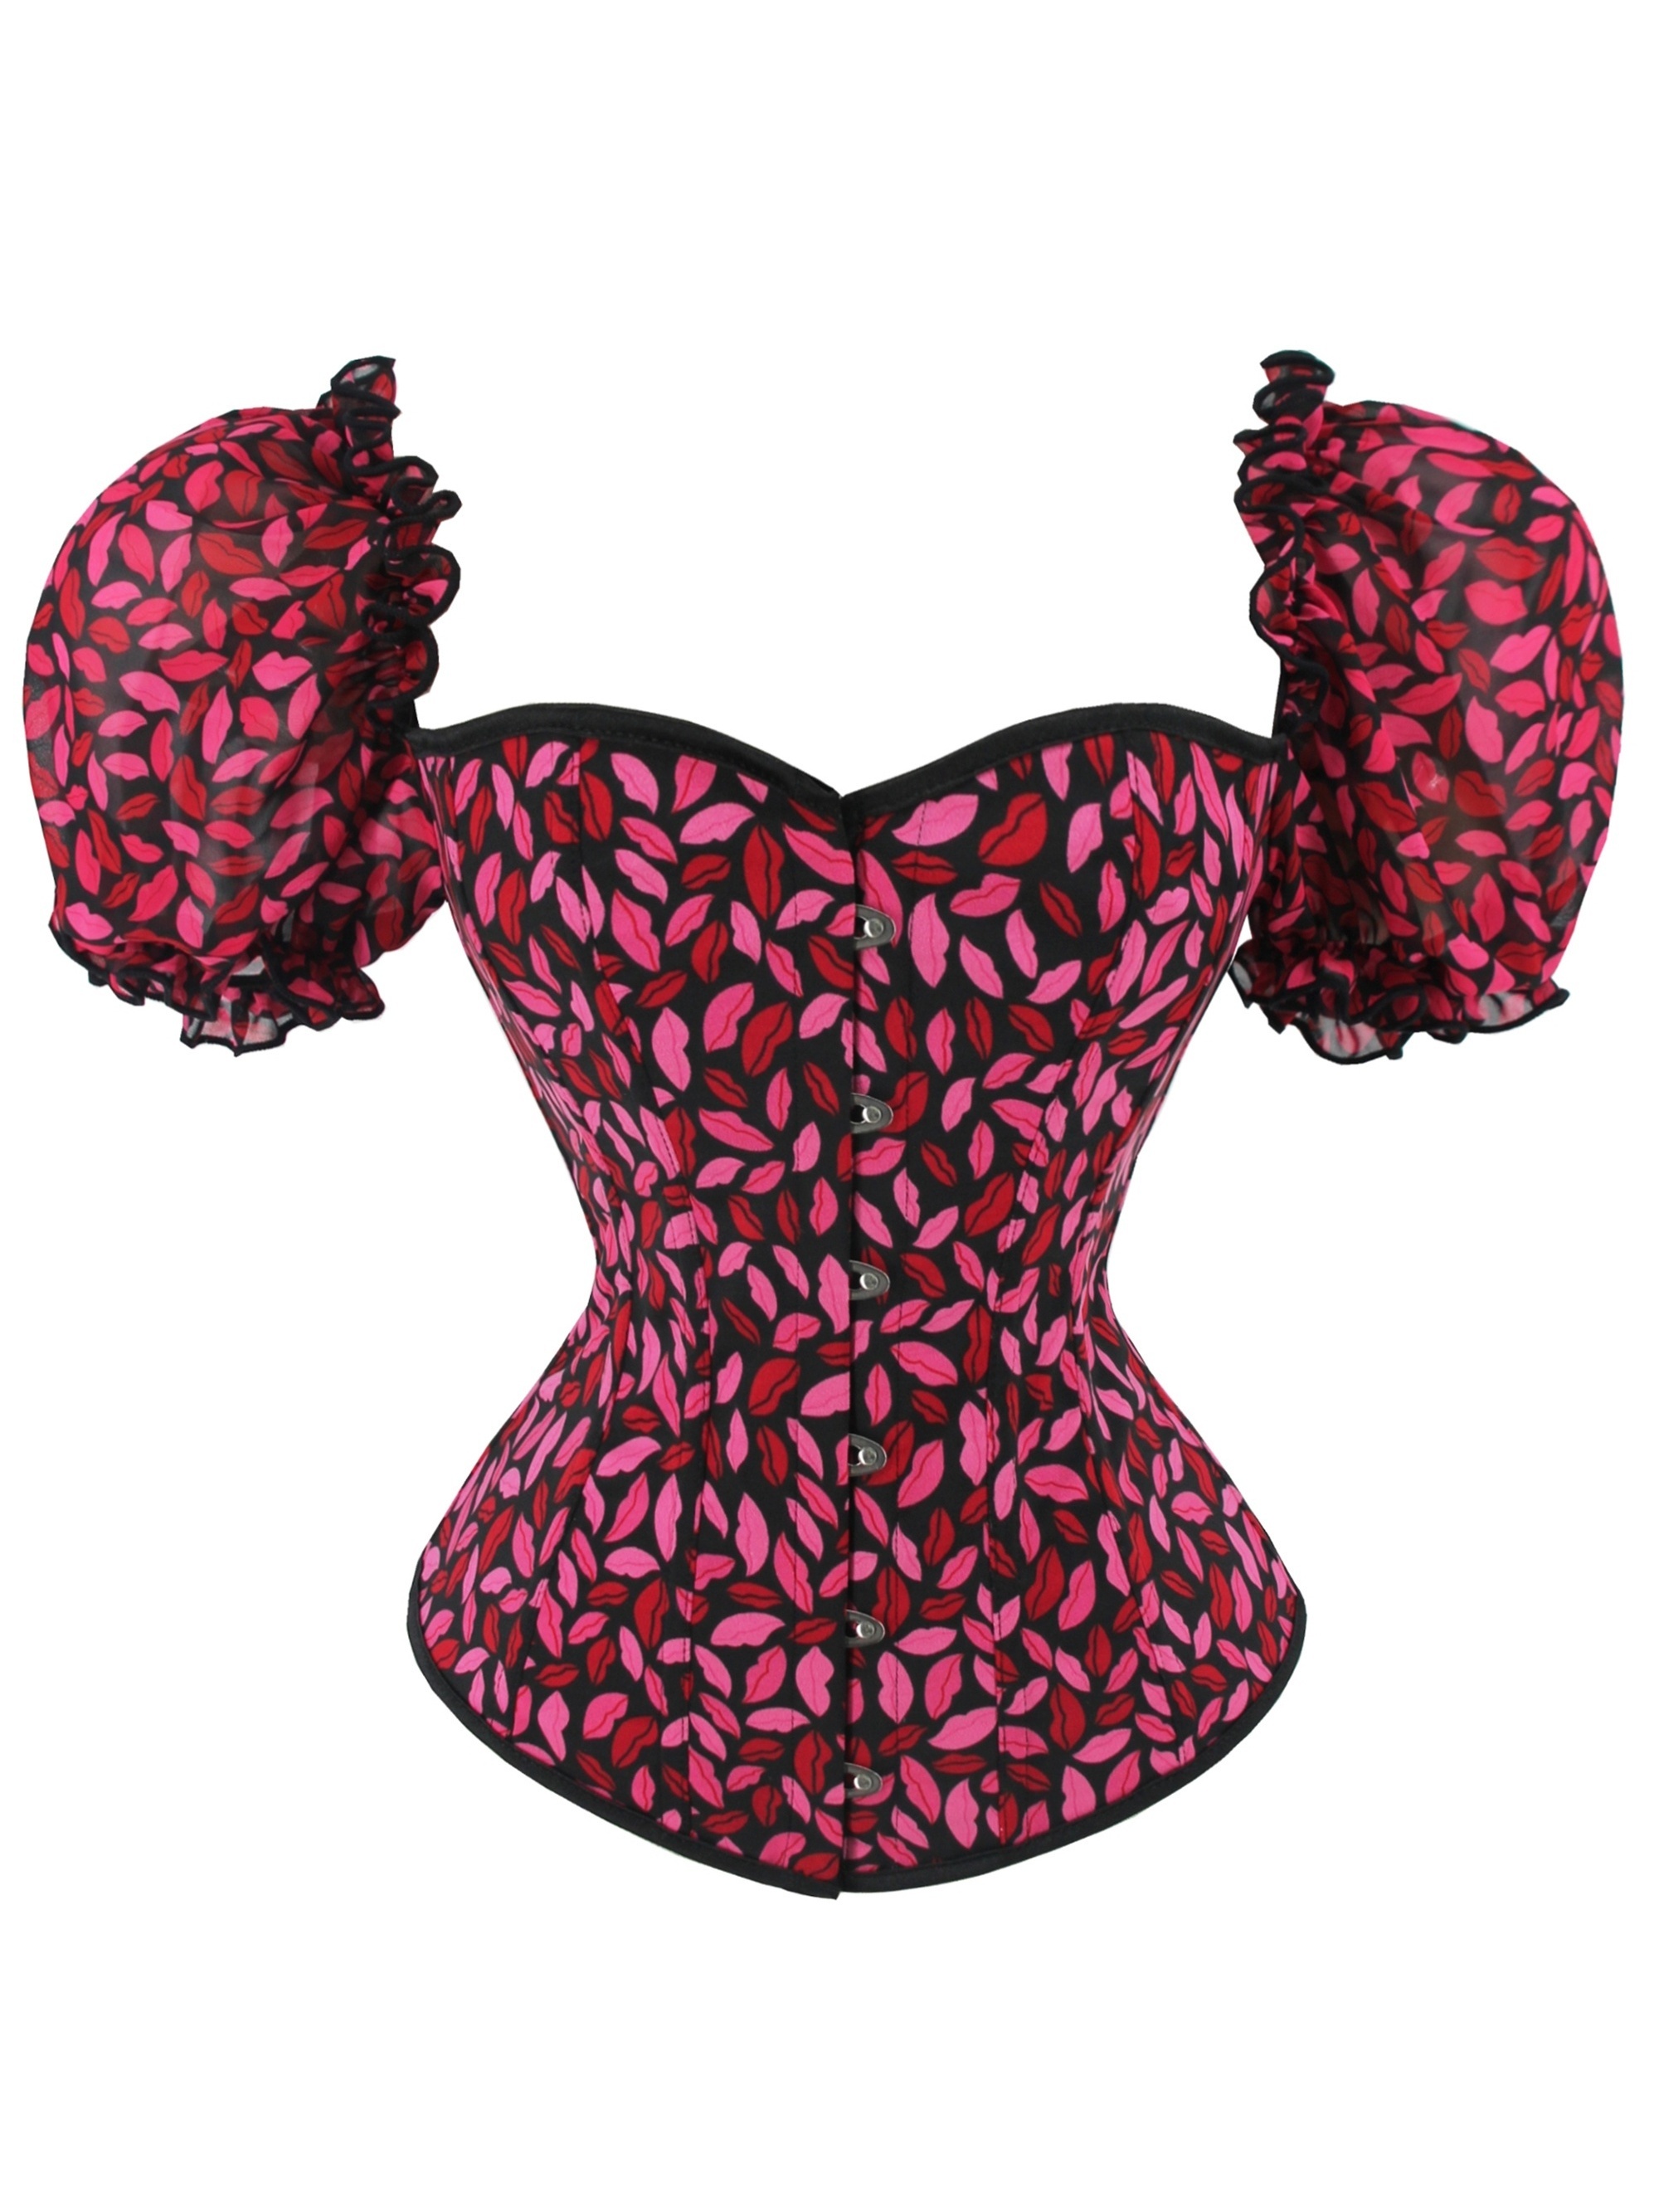 Women's Lingerie Lace Bustier Sexy Pink Lace Up Corsets And Bustiers  Leopard Print Plus Size Female Corset